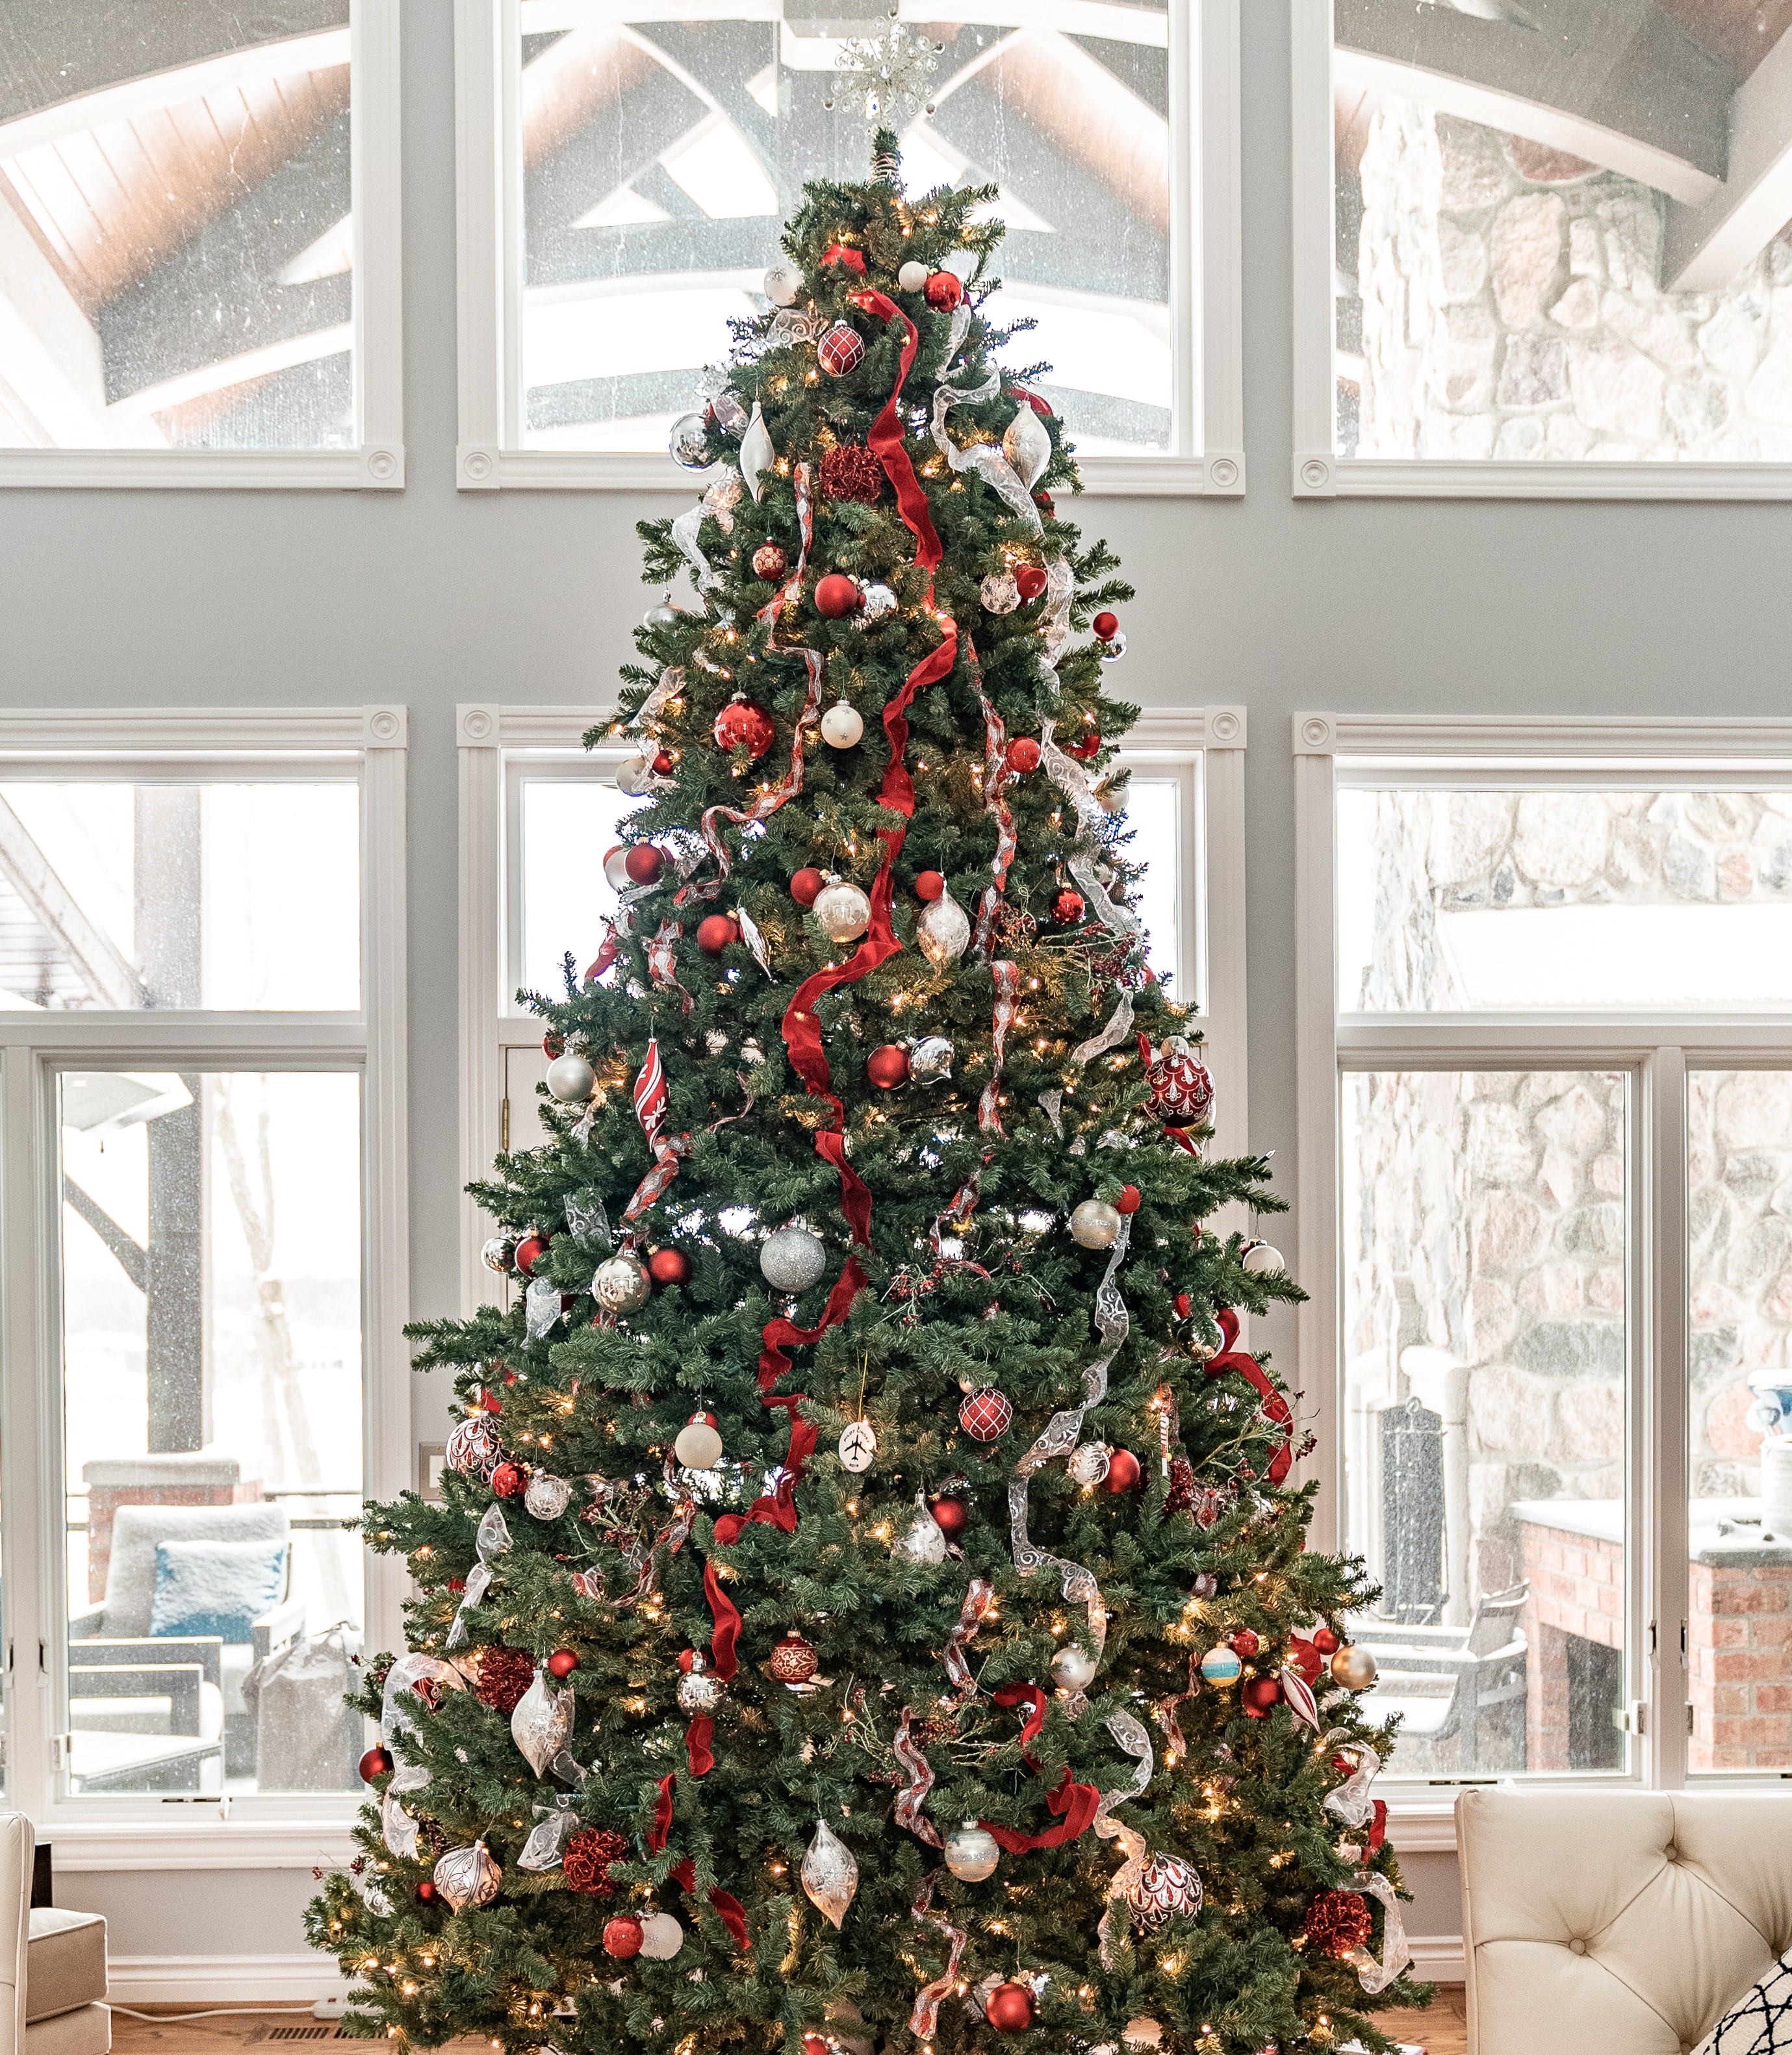 A Christmas Tree decorated with a classic and traditional look.